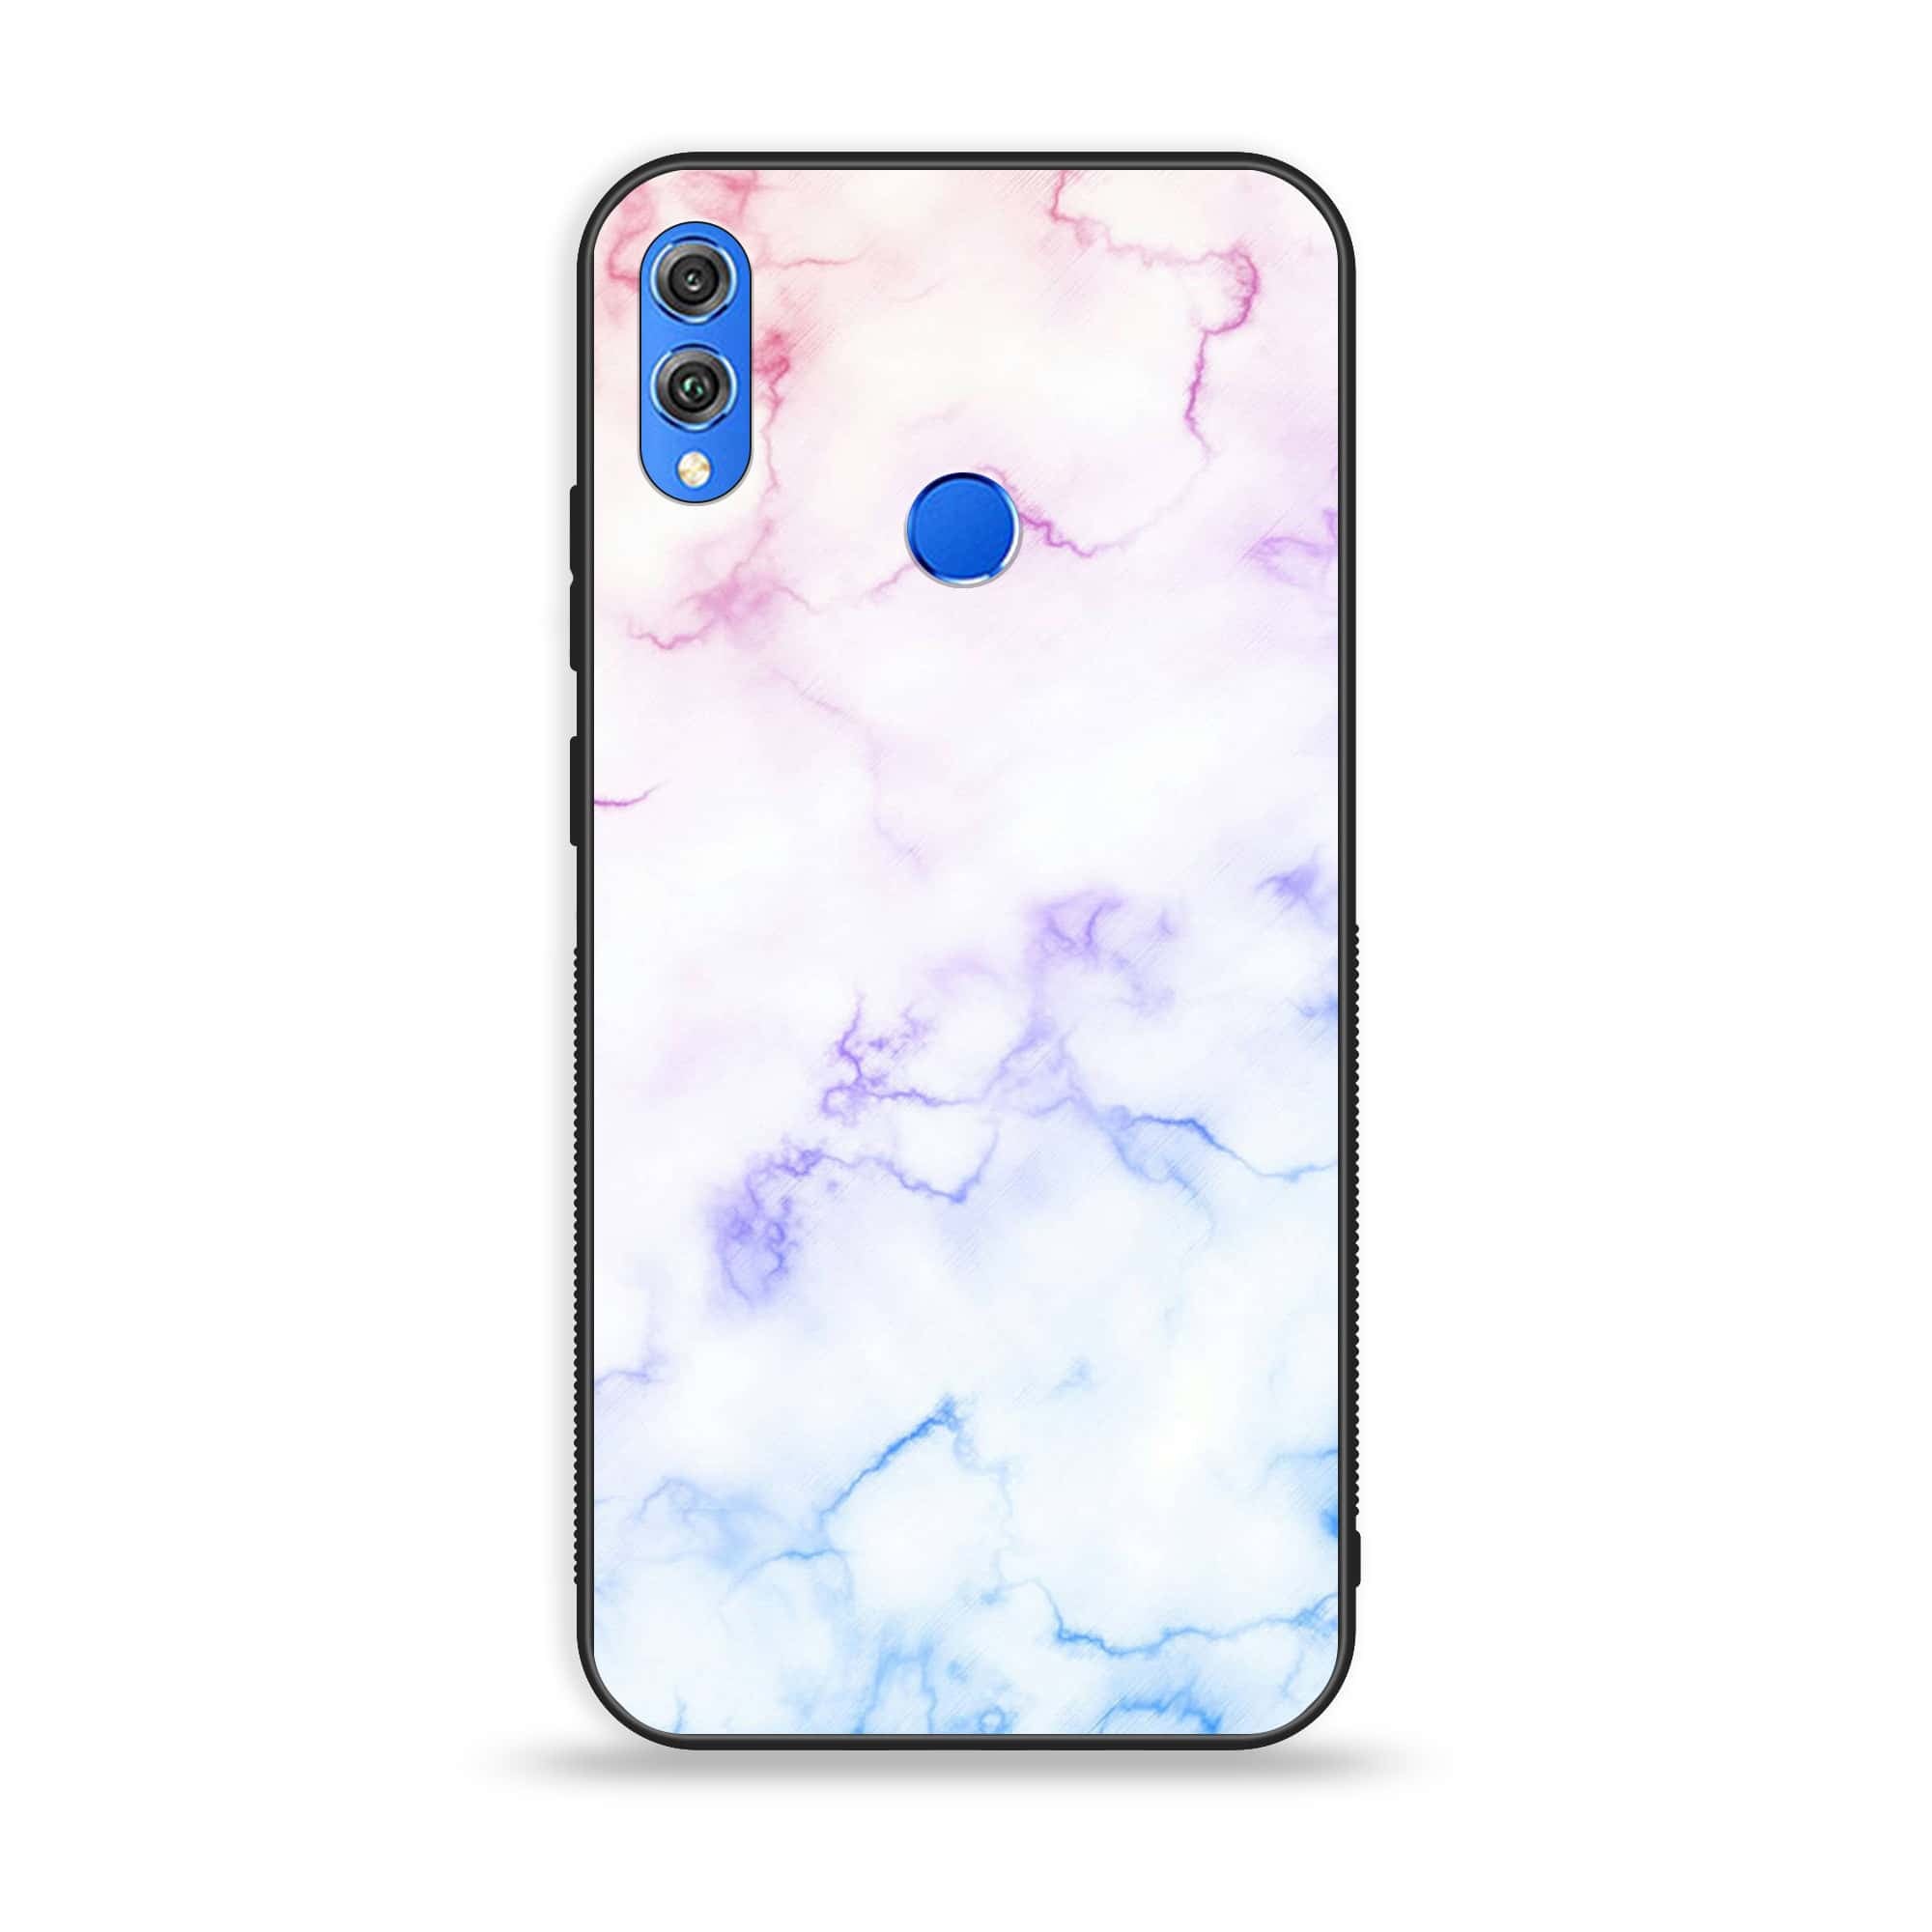 Huawei Honor 8X - White Marble Series - Premium Printed Glass soft Bumper shock Proof Case